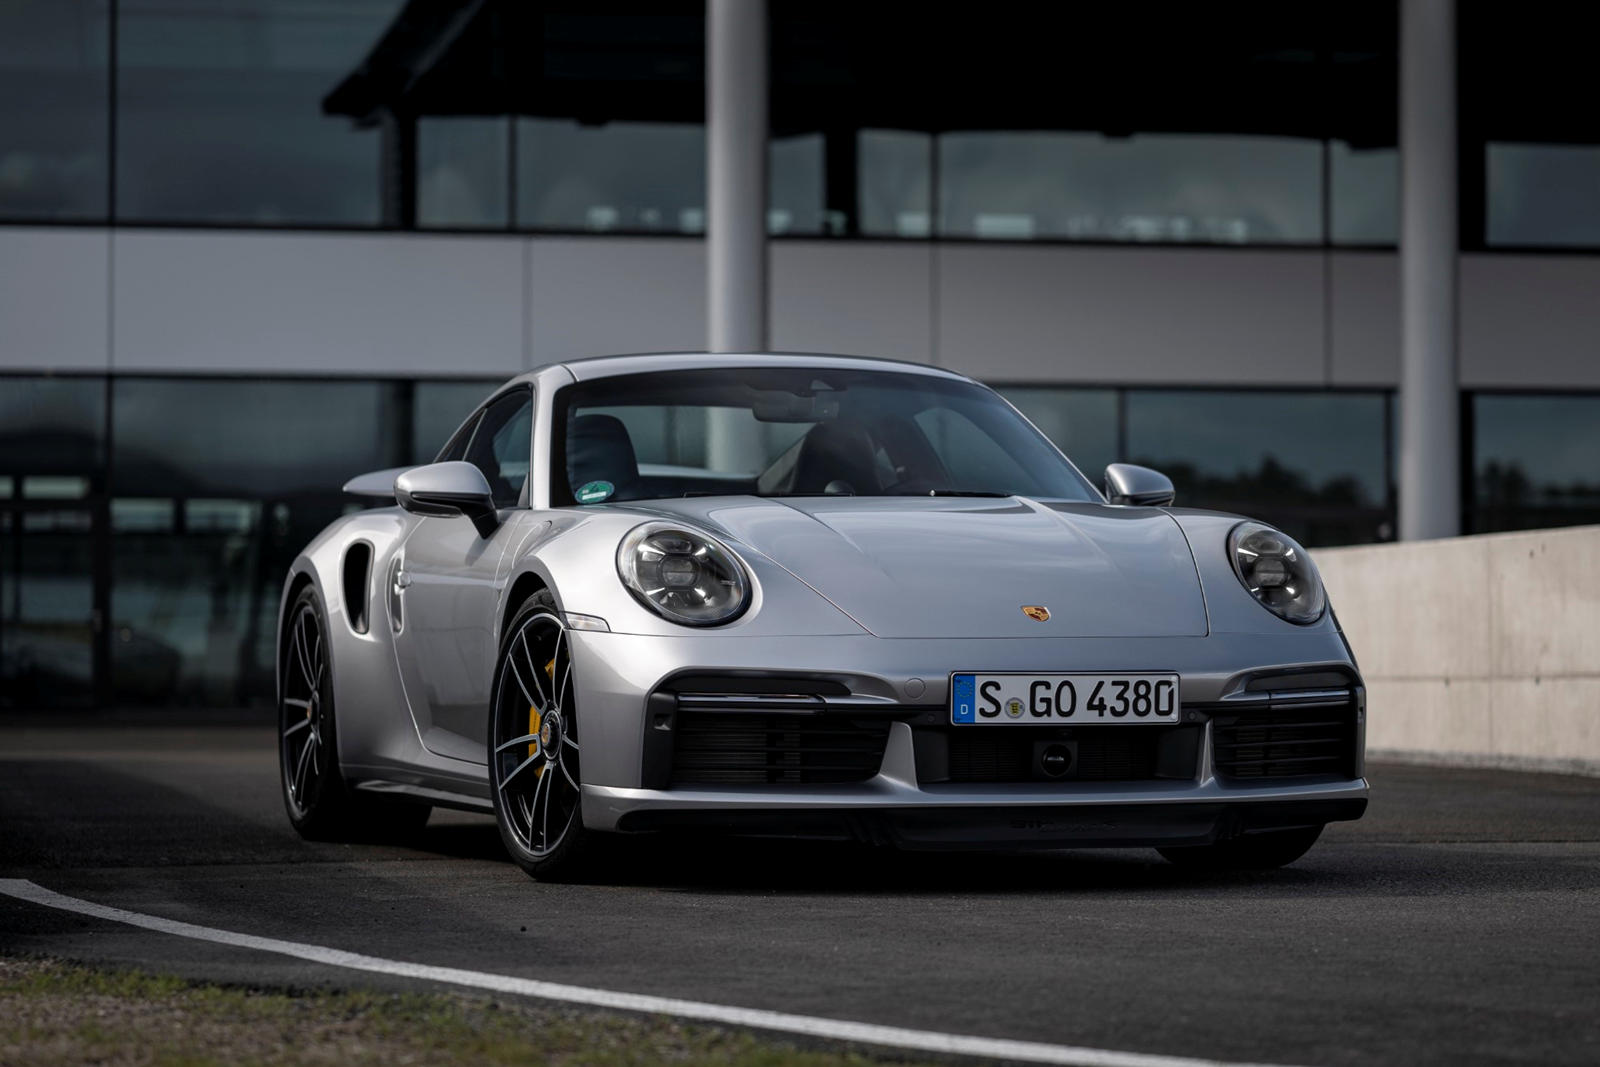 photo of 2021 Porsche 911 Turbo S First Drive Review: Daily Driver With Monster Performance image